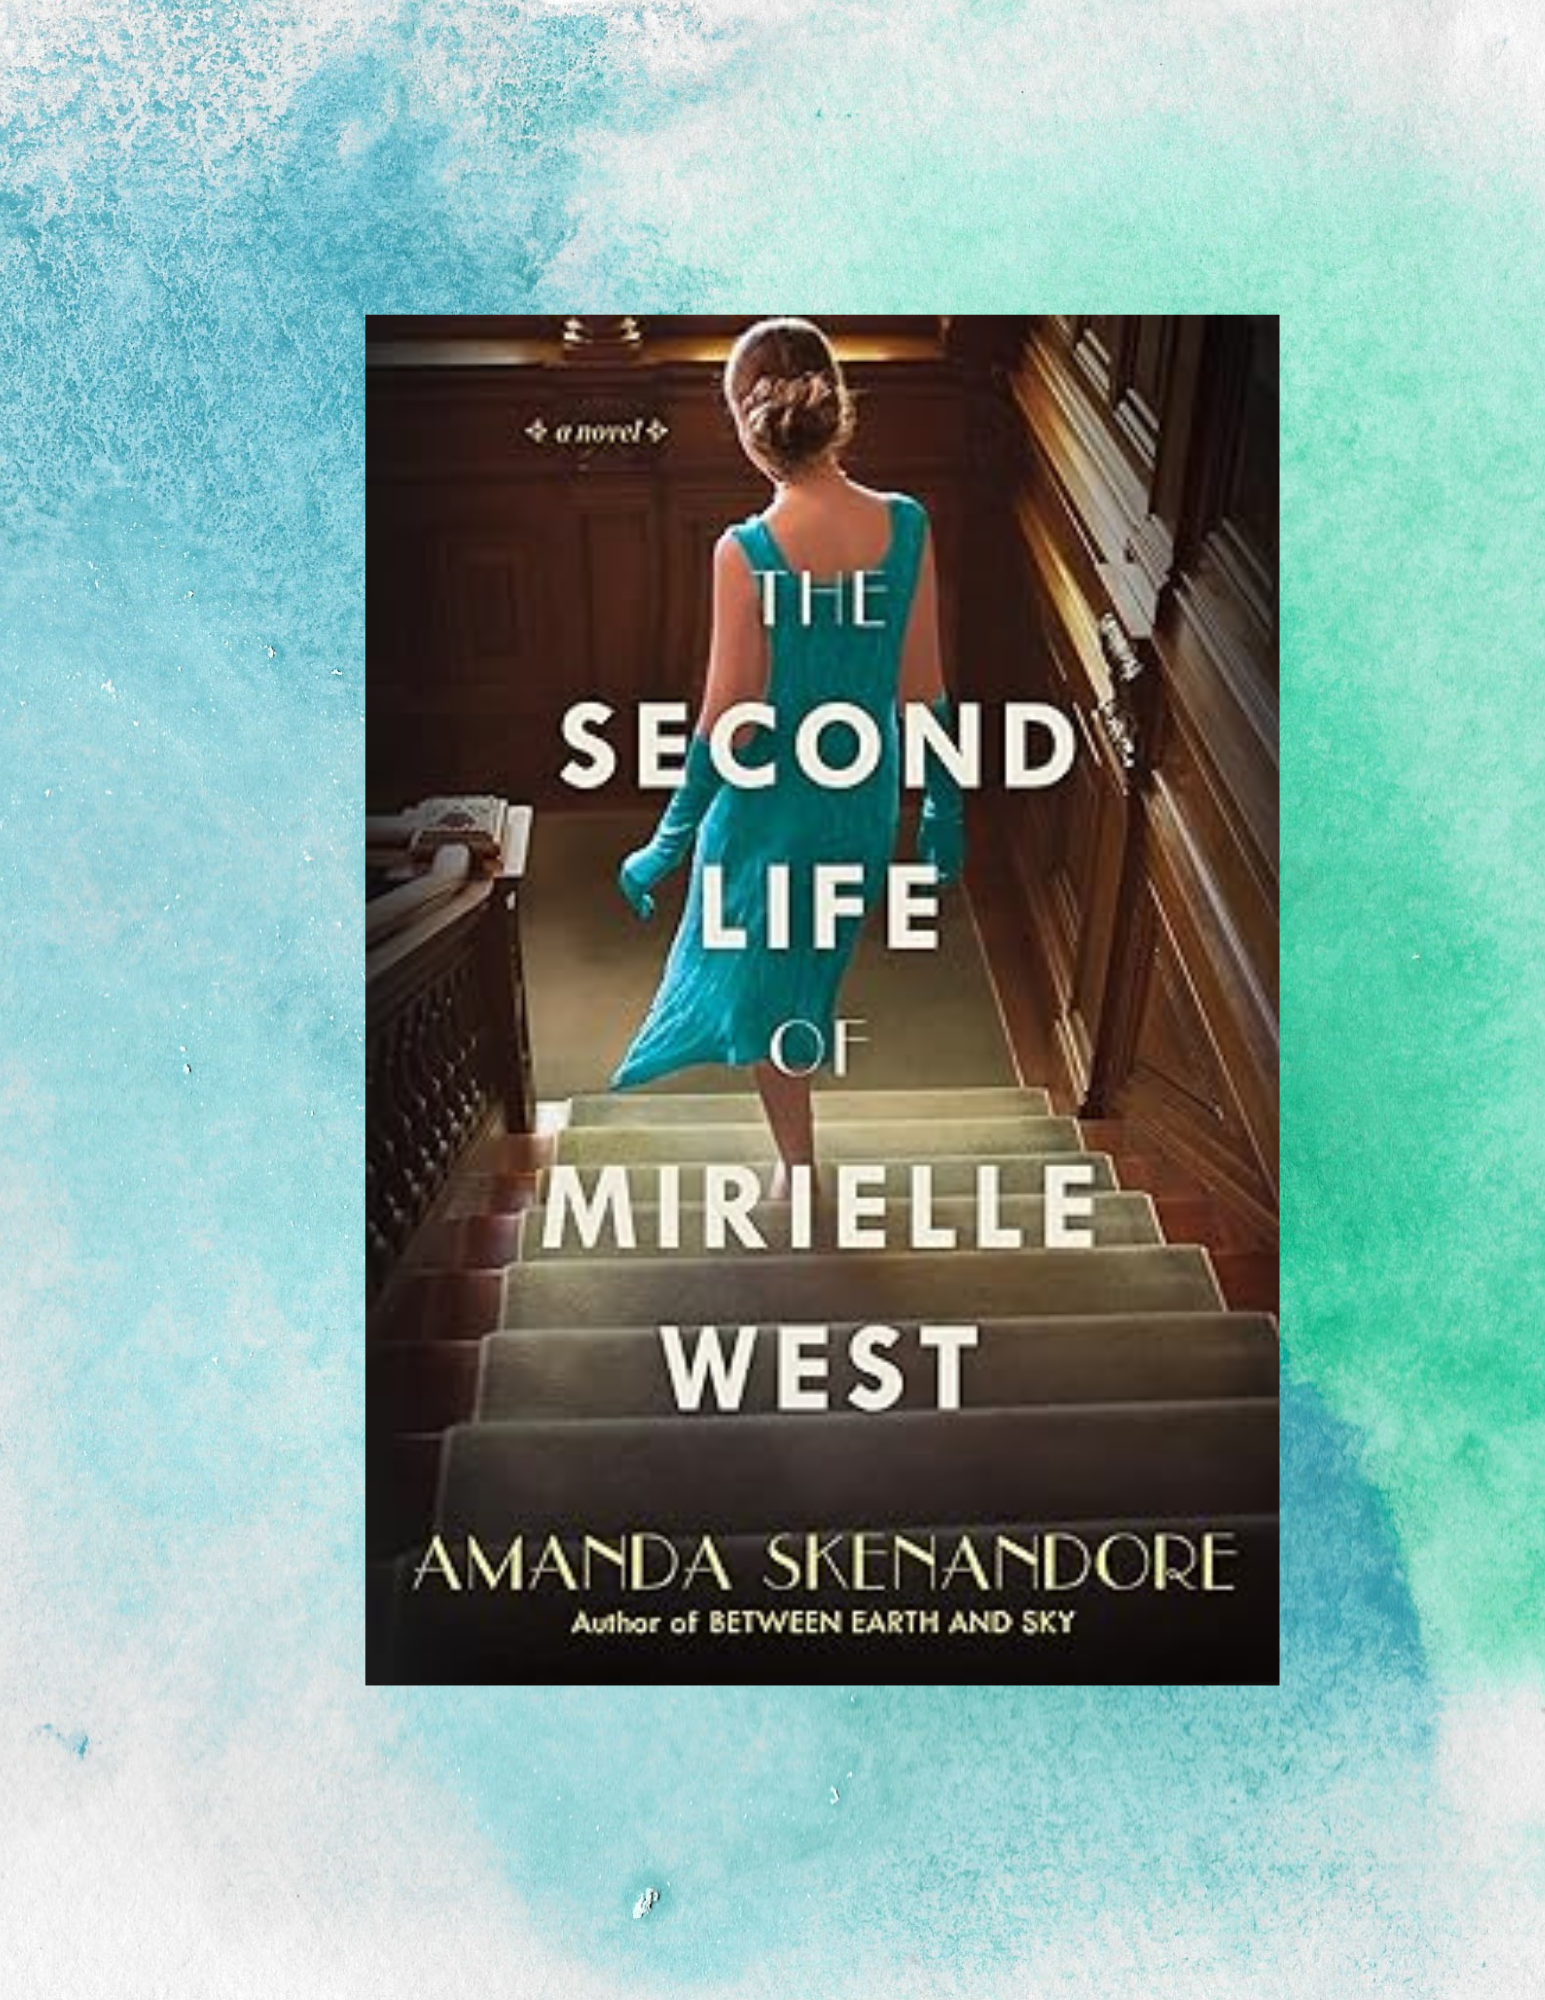 Book Review for the Second Life of Mirielle West by Amanda Skenandore